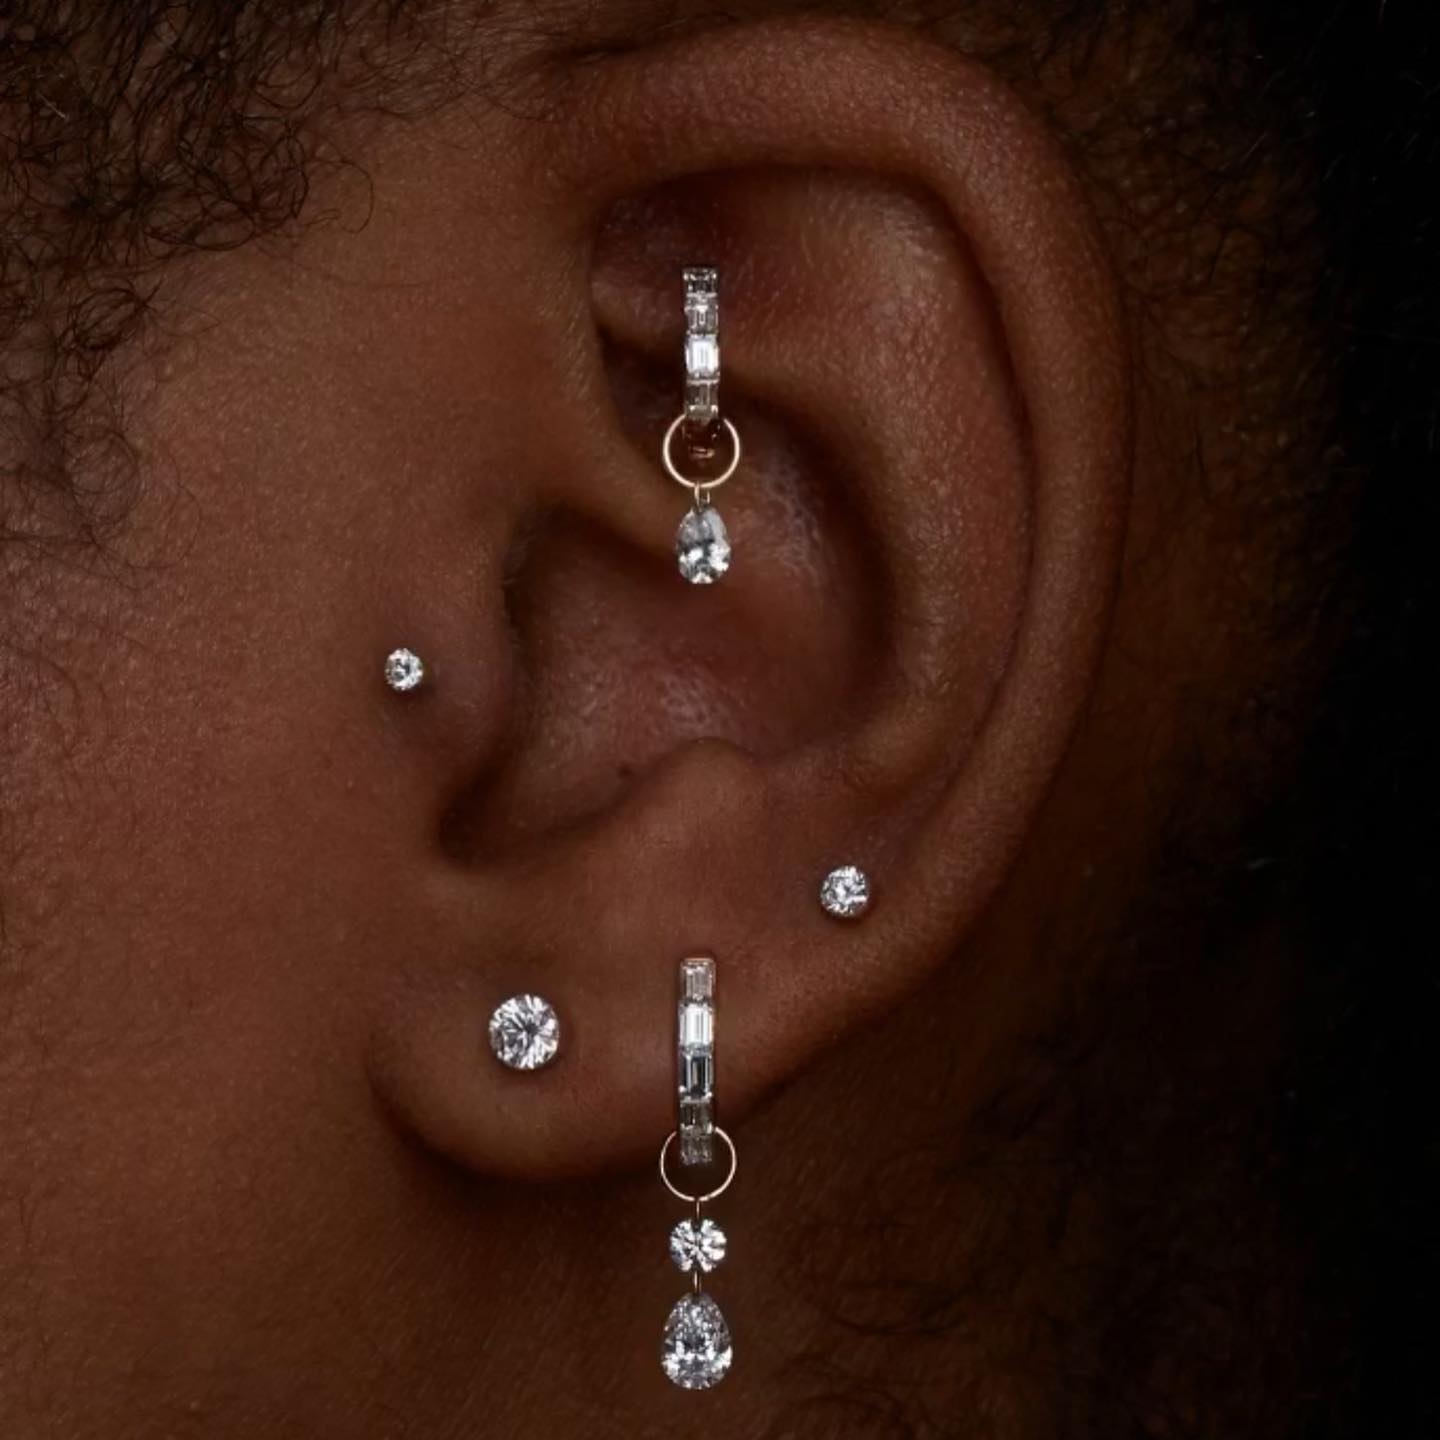 Invisible set diamond earrings in lobe, cartilage, rook, and tragus piercing placements